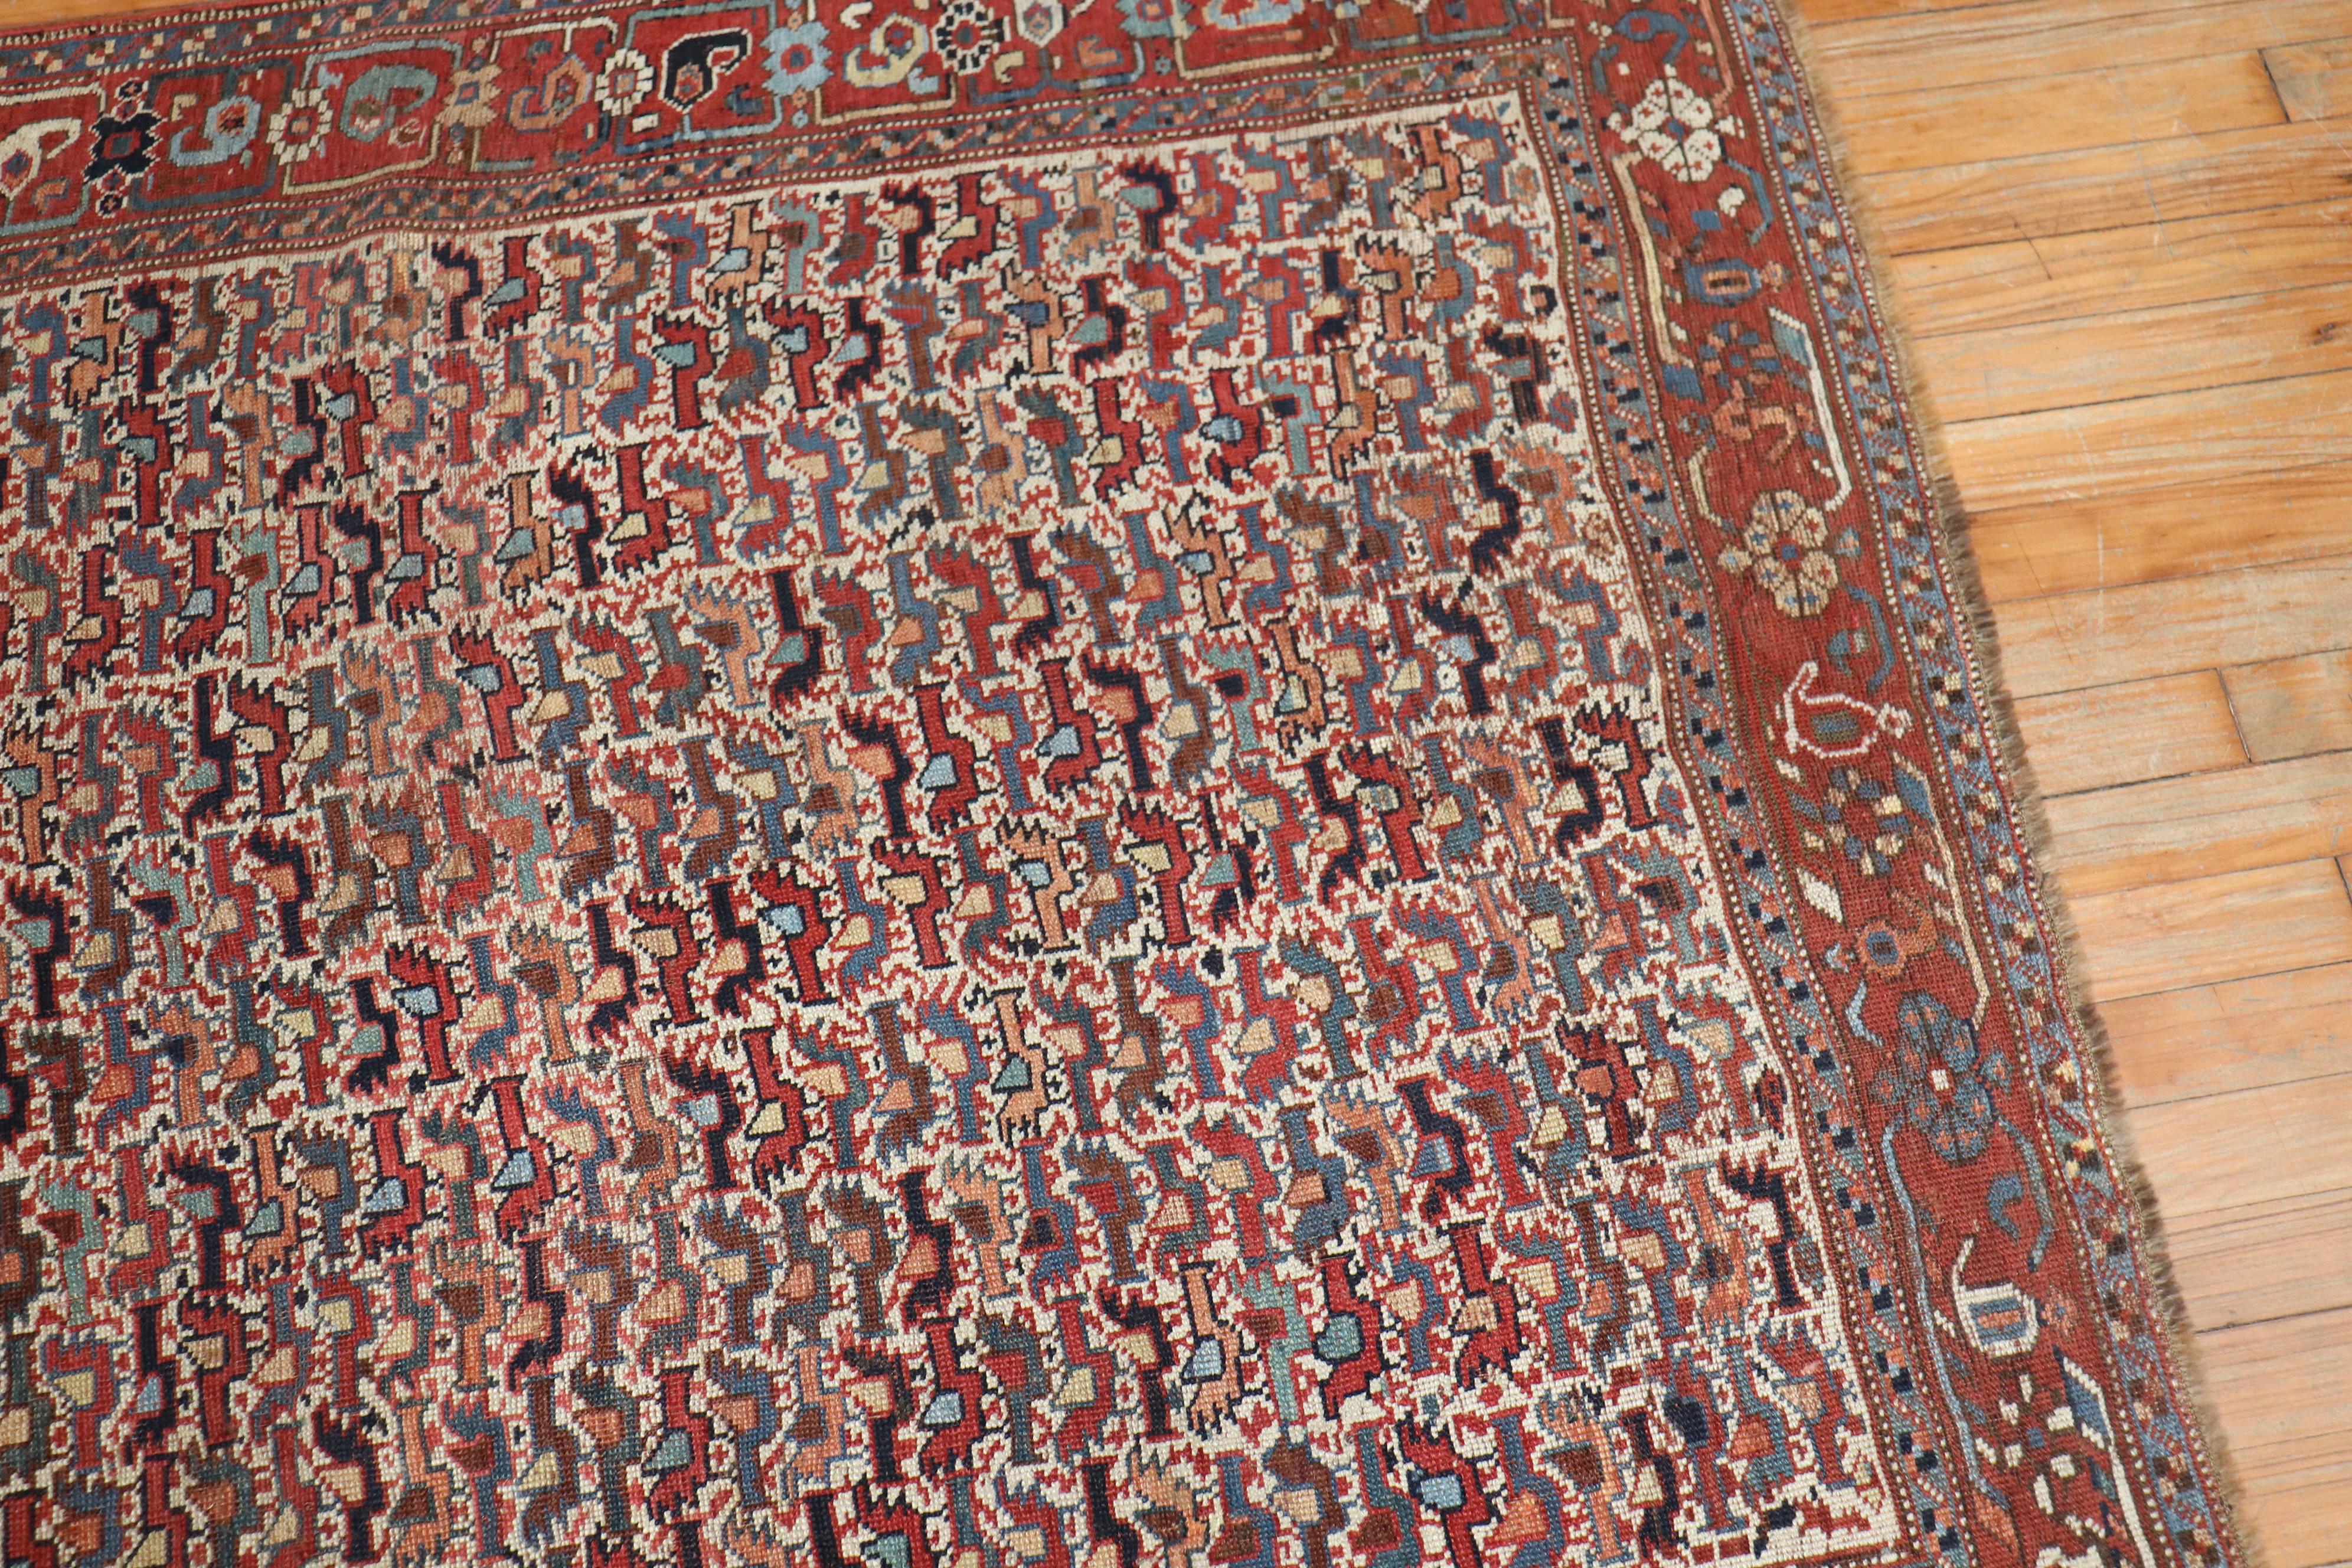 Tribal Chicken Motif Rustic Persian Afshar Accent Rug, Early 20th Century For Sale 3